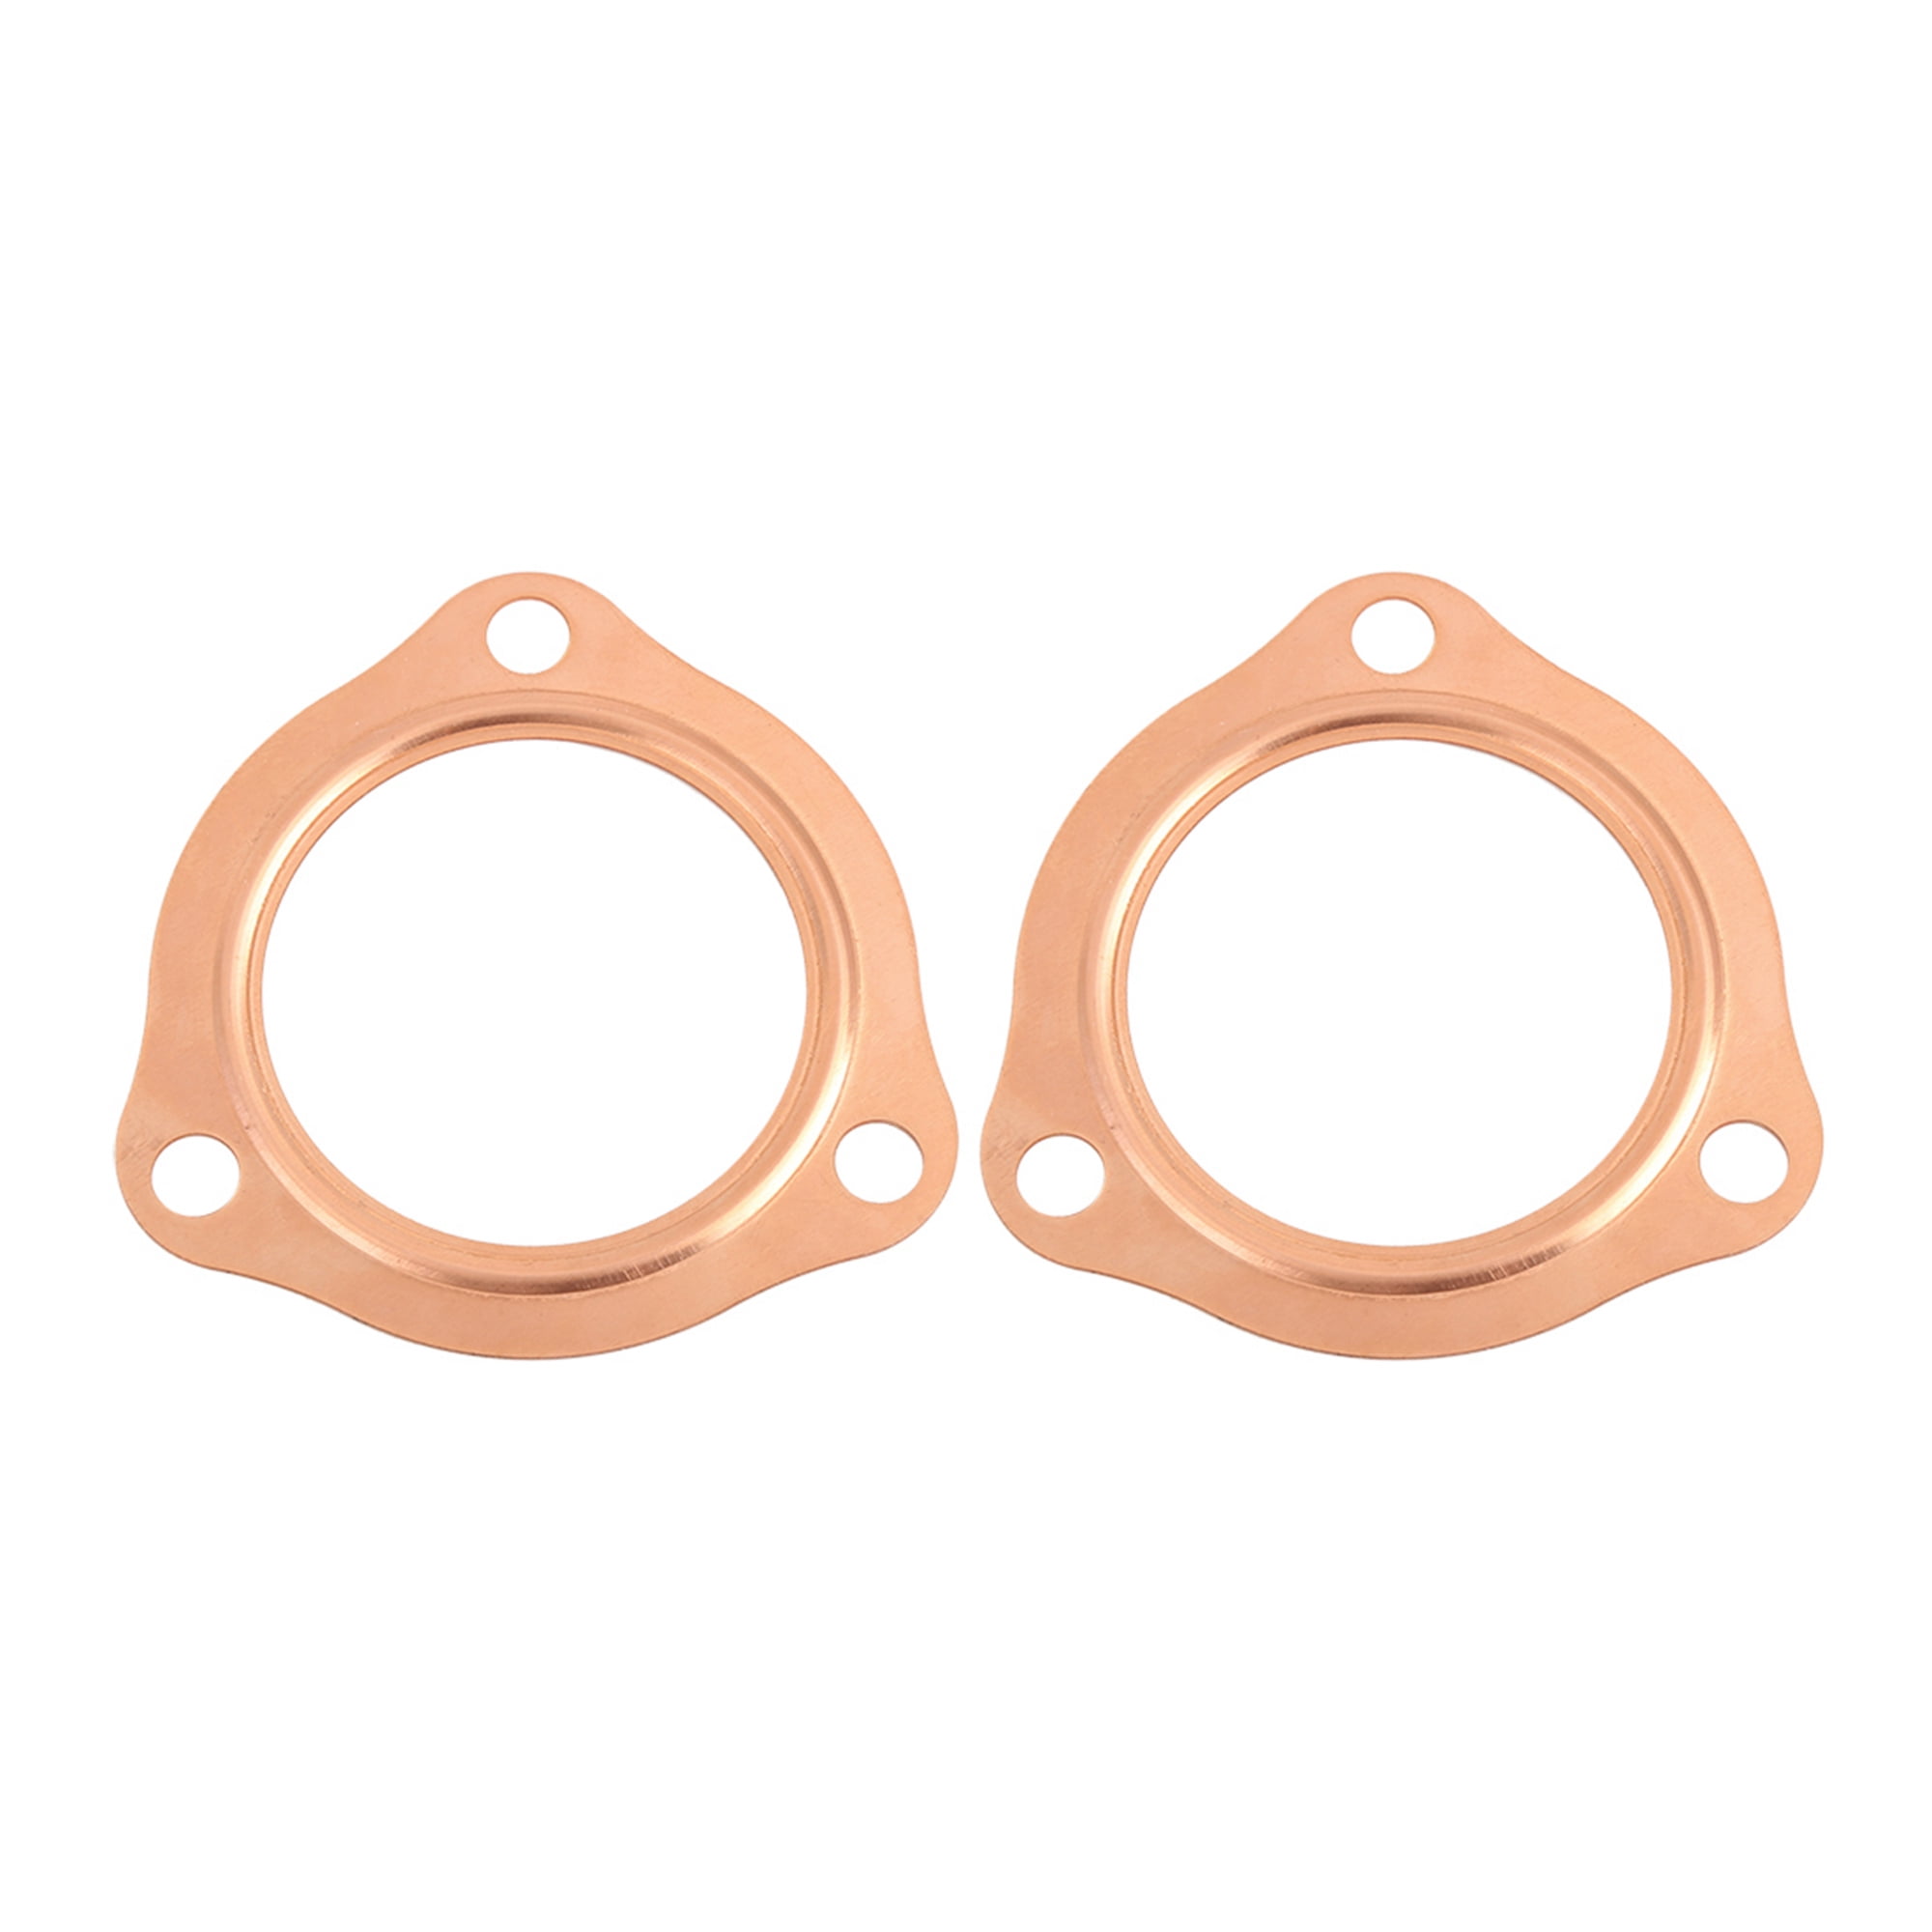 X AUTOHAUX 2pcs 2.5inch Exhaust Pipe Copper Header Car Engine Gasket Seal 